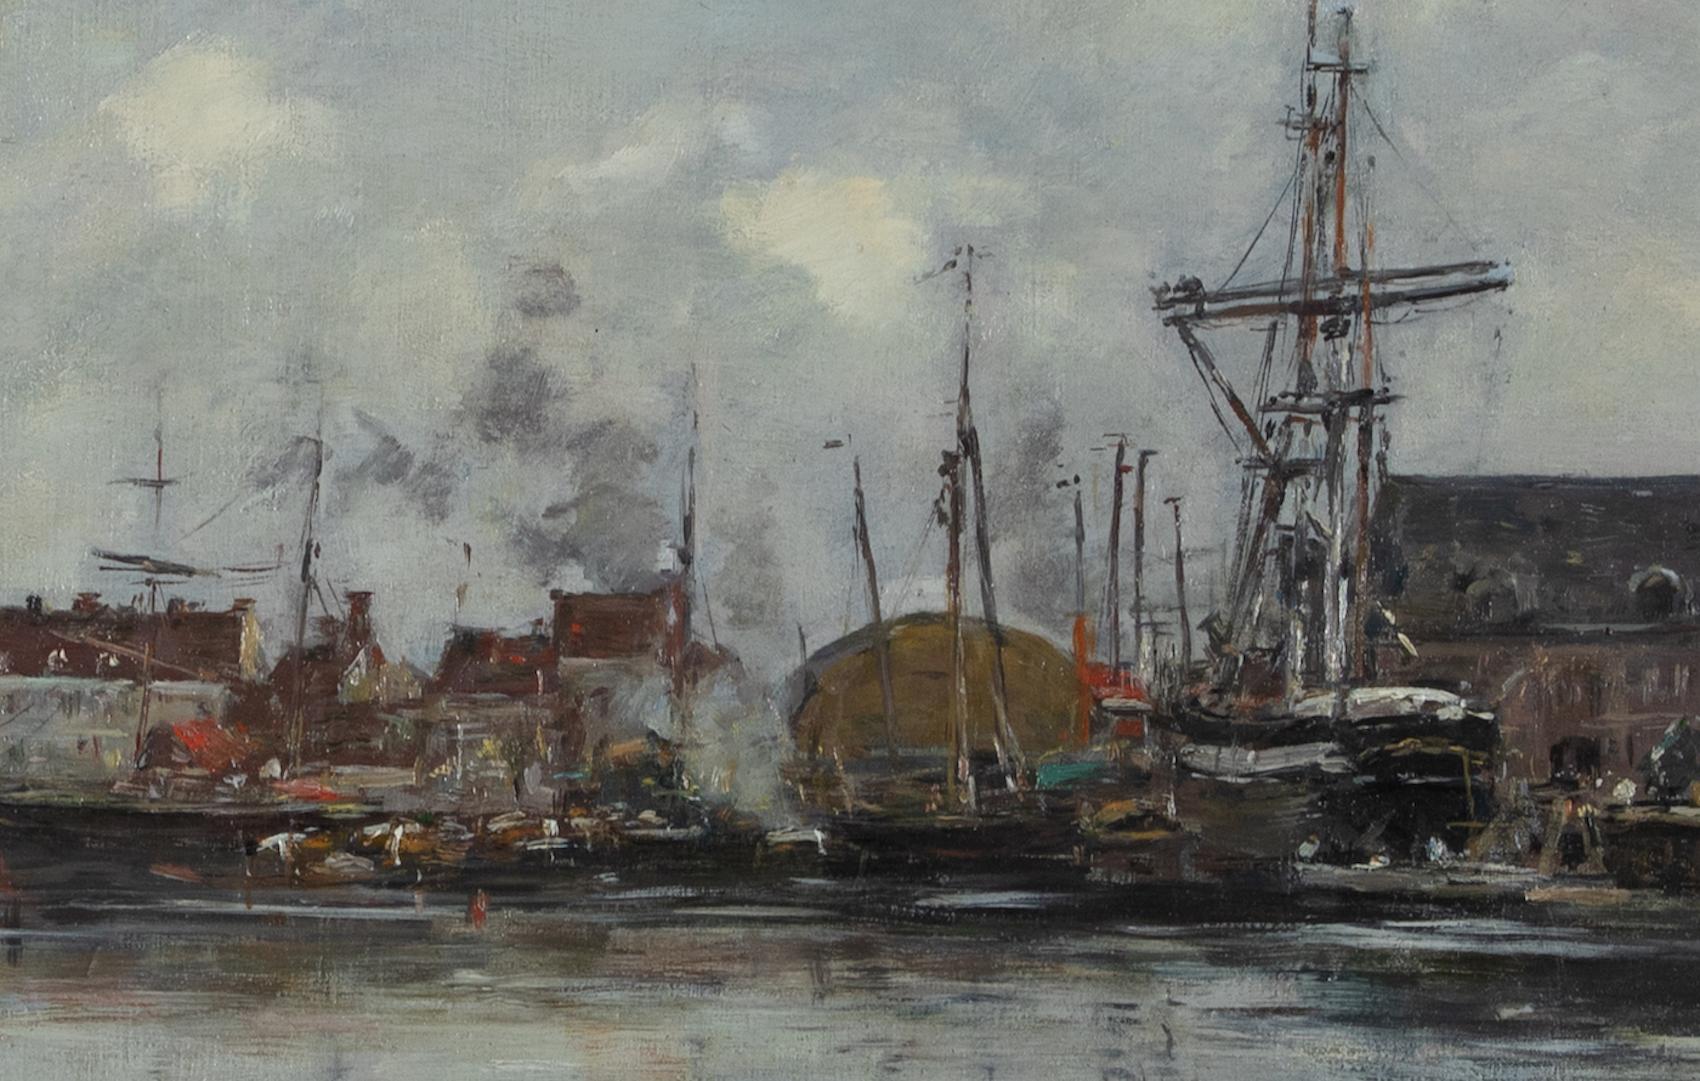 Dunkerque, le vieux bassin by Eugène Boudin - Figurative water scene  - Post-Impressionist Painting by Eugène Louis Boudin